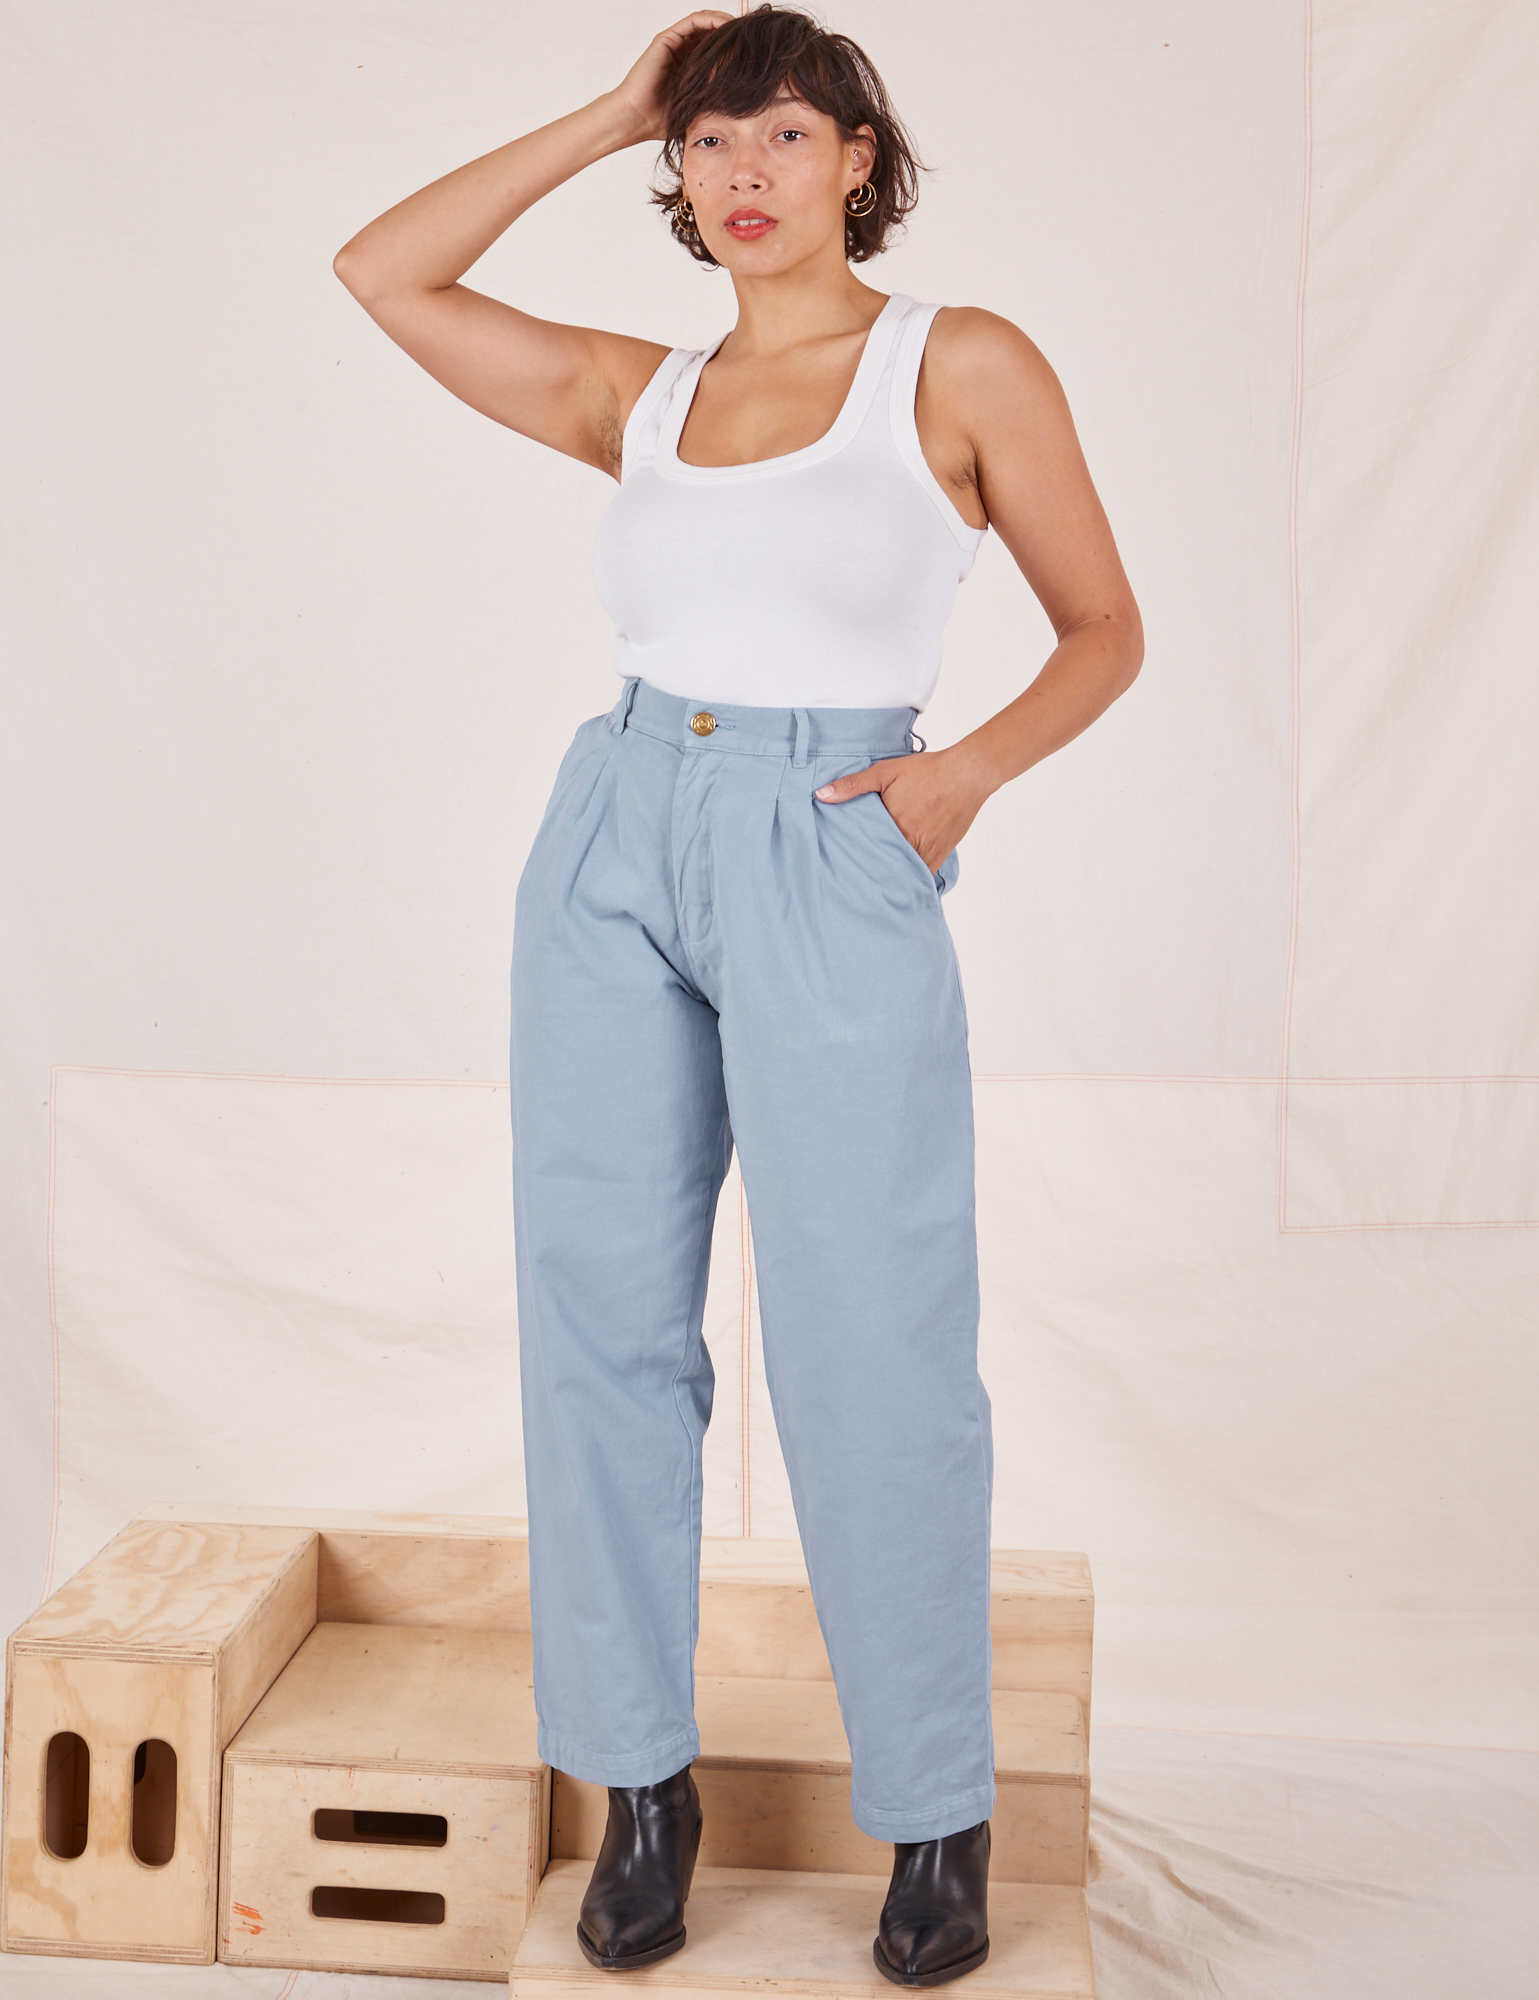 Tiara is 5'4" and wearing XS Heavyweight Trousers in Periwinkle paired with vintage off-white Cropped Tank Top